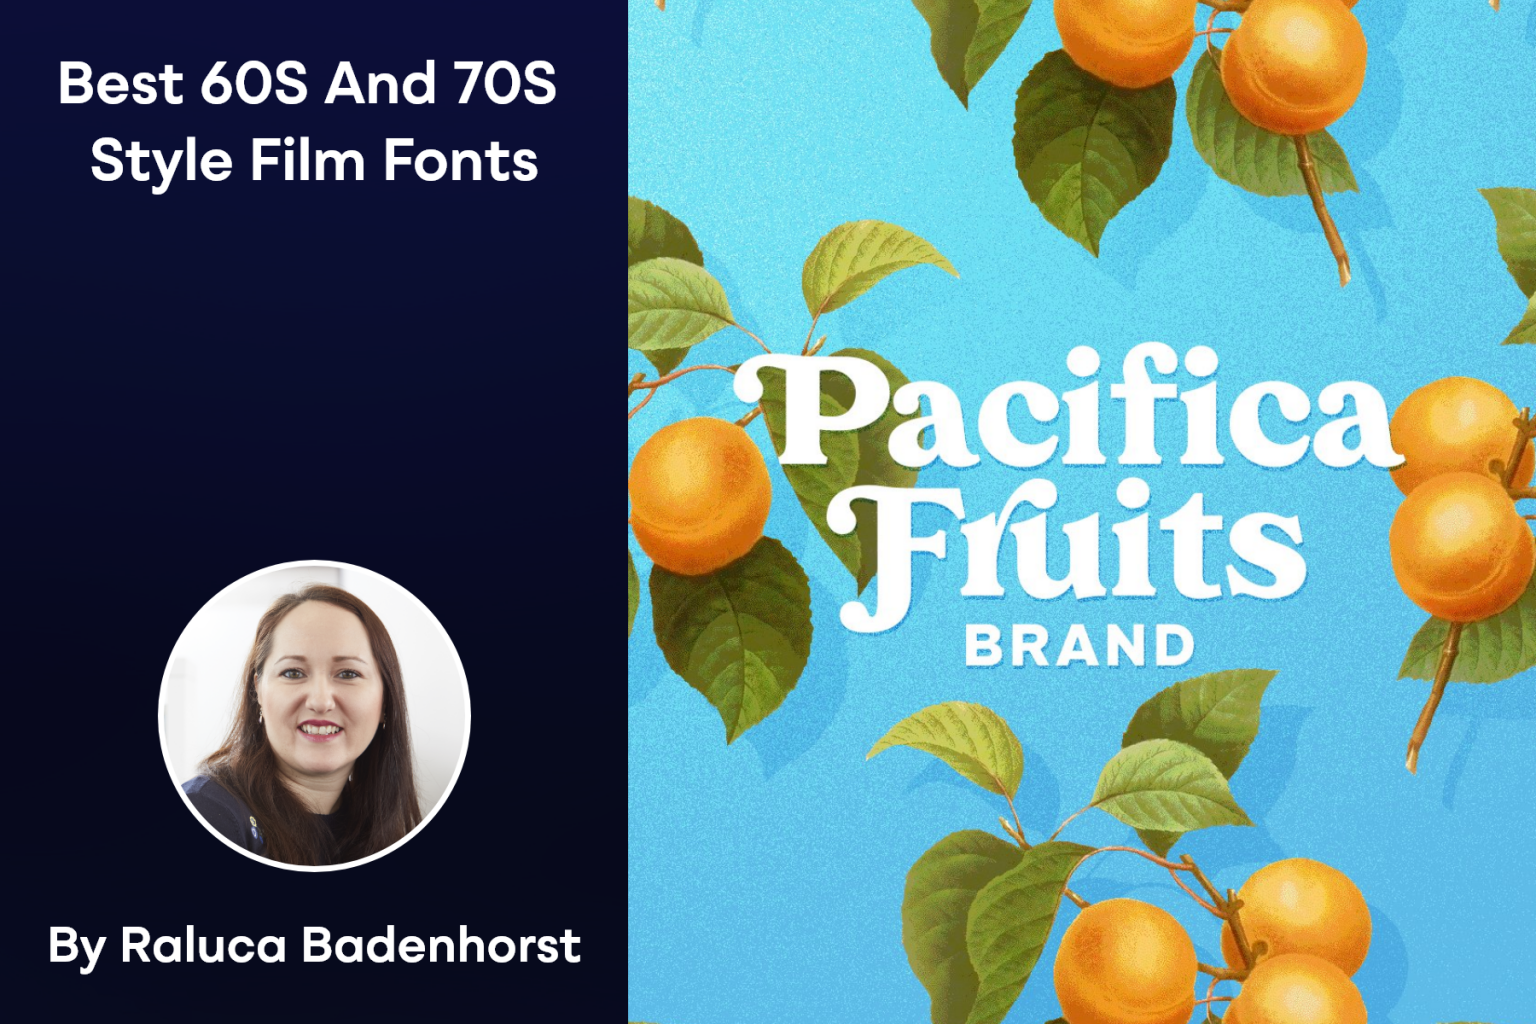 Best 60s and 70s Style Film Fonts